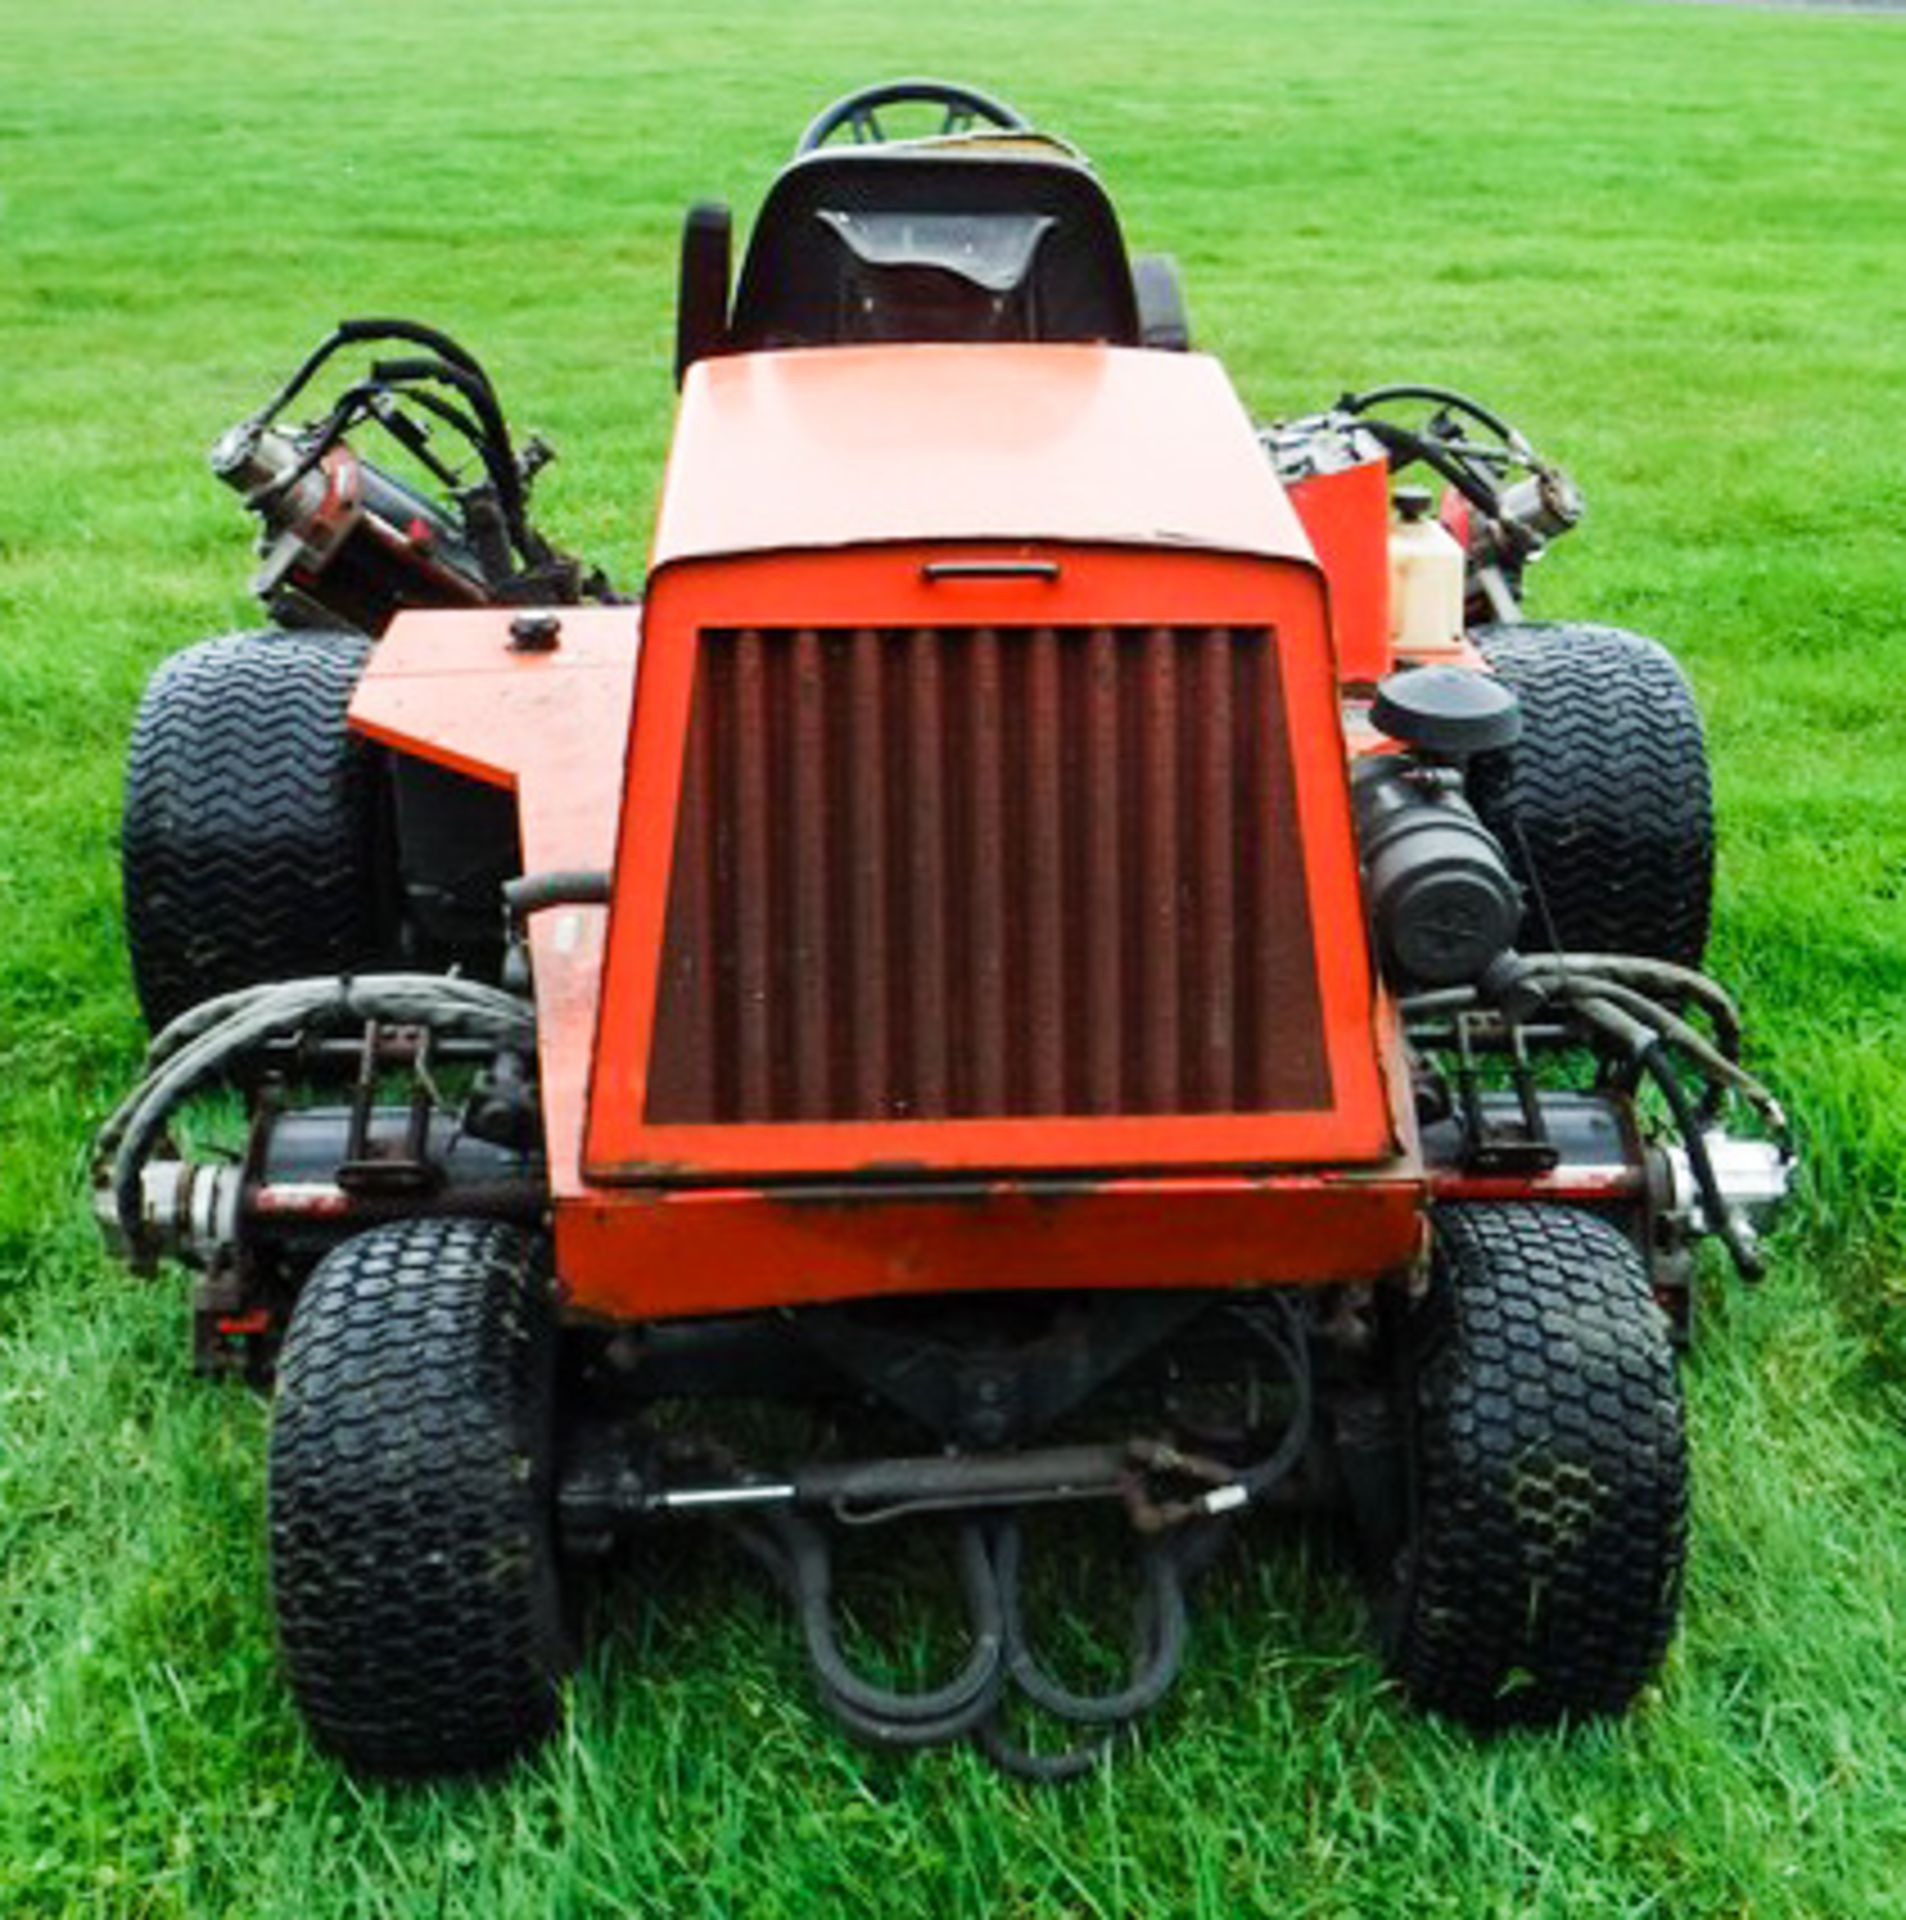 LF135 JACOBSEN FAIRWAY RIDE ON MOWER, 1647HRS (NOT VERIFIED) - Image 3 of 9